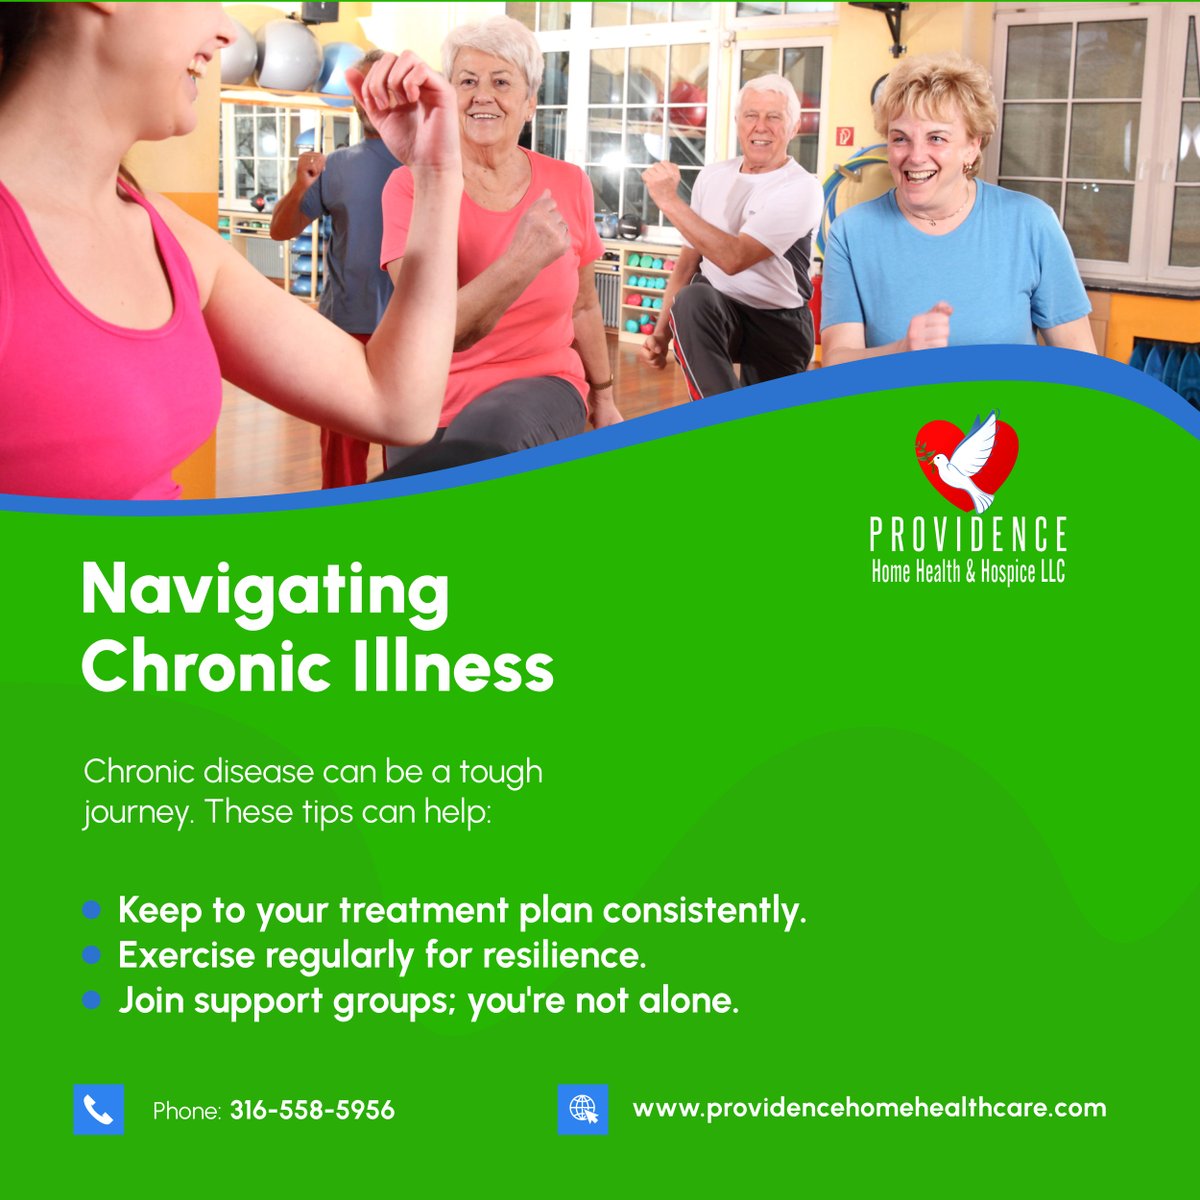 Brave the unchartered waters of chronic illness by following these tips: adhere to your treatment plan, exercise daily, and seek comfort in shared experiences. 

#ChronicIllnessManagement #WichitaKS #HomeHealthCare